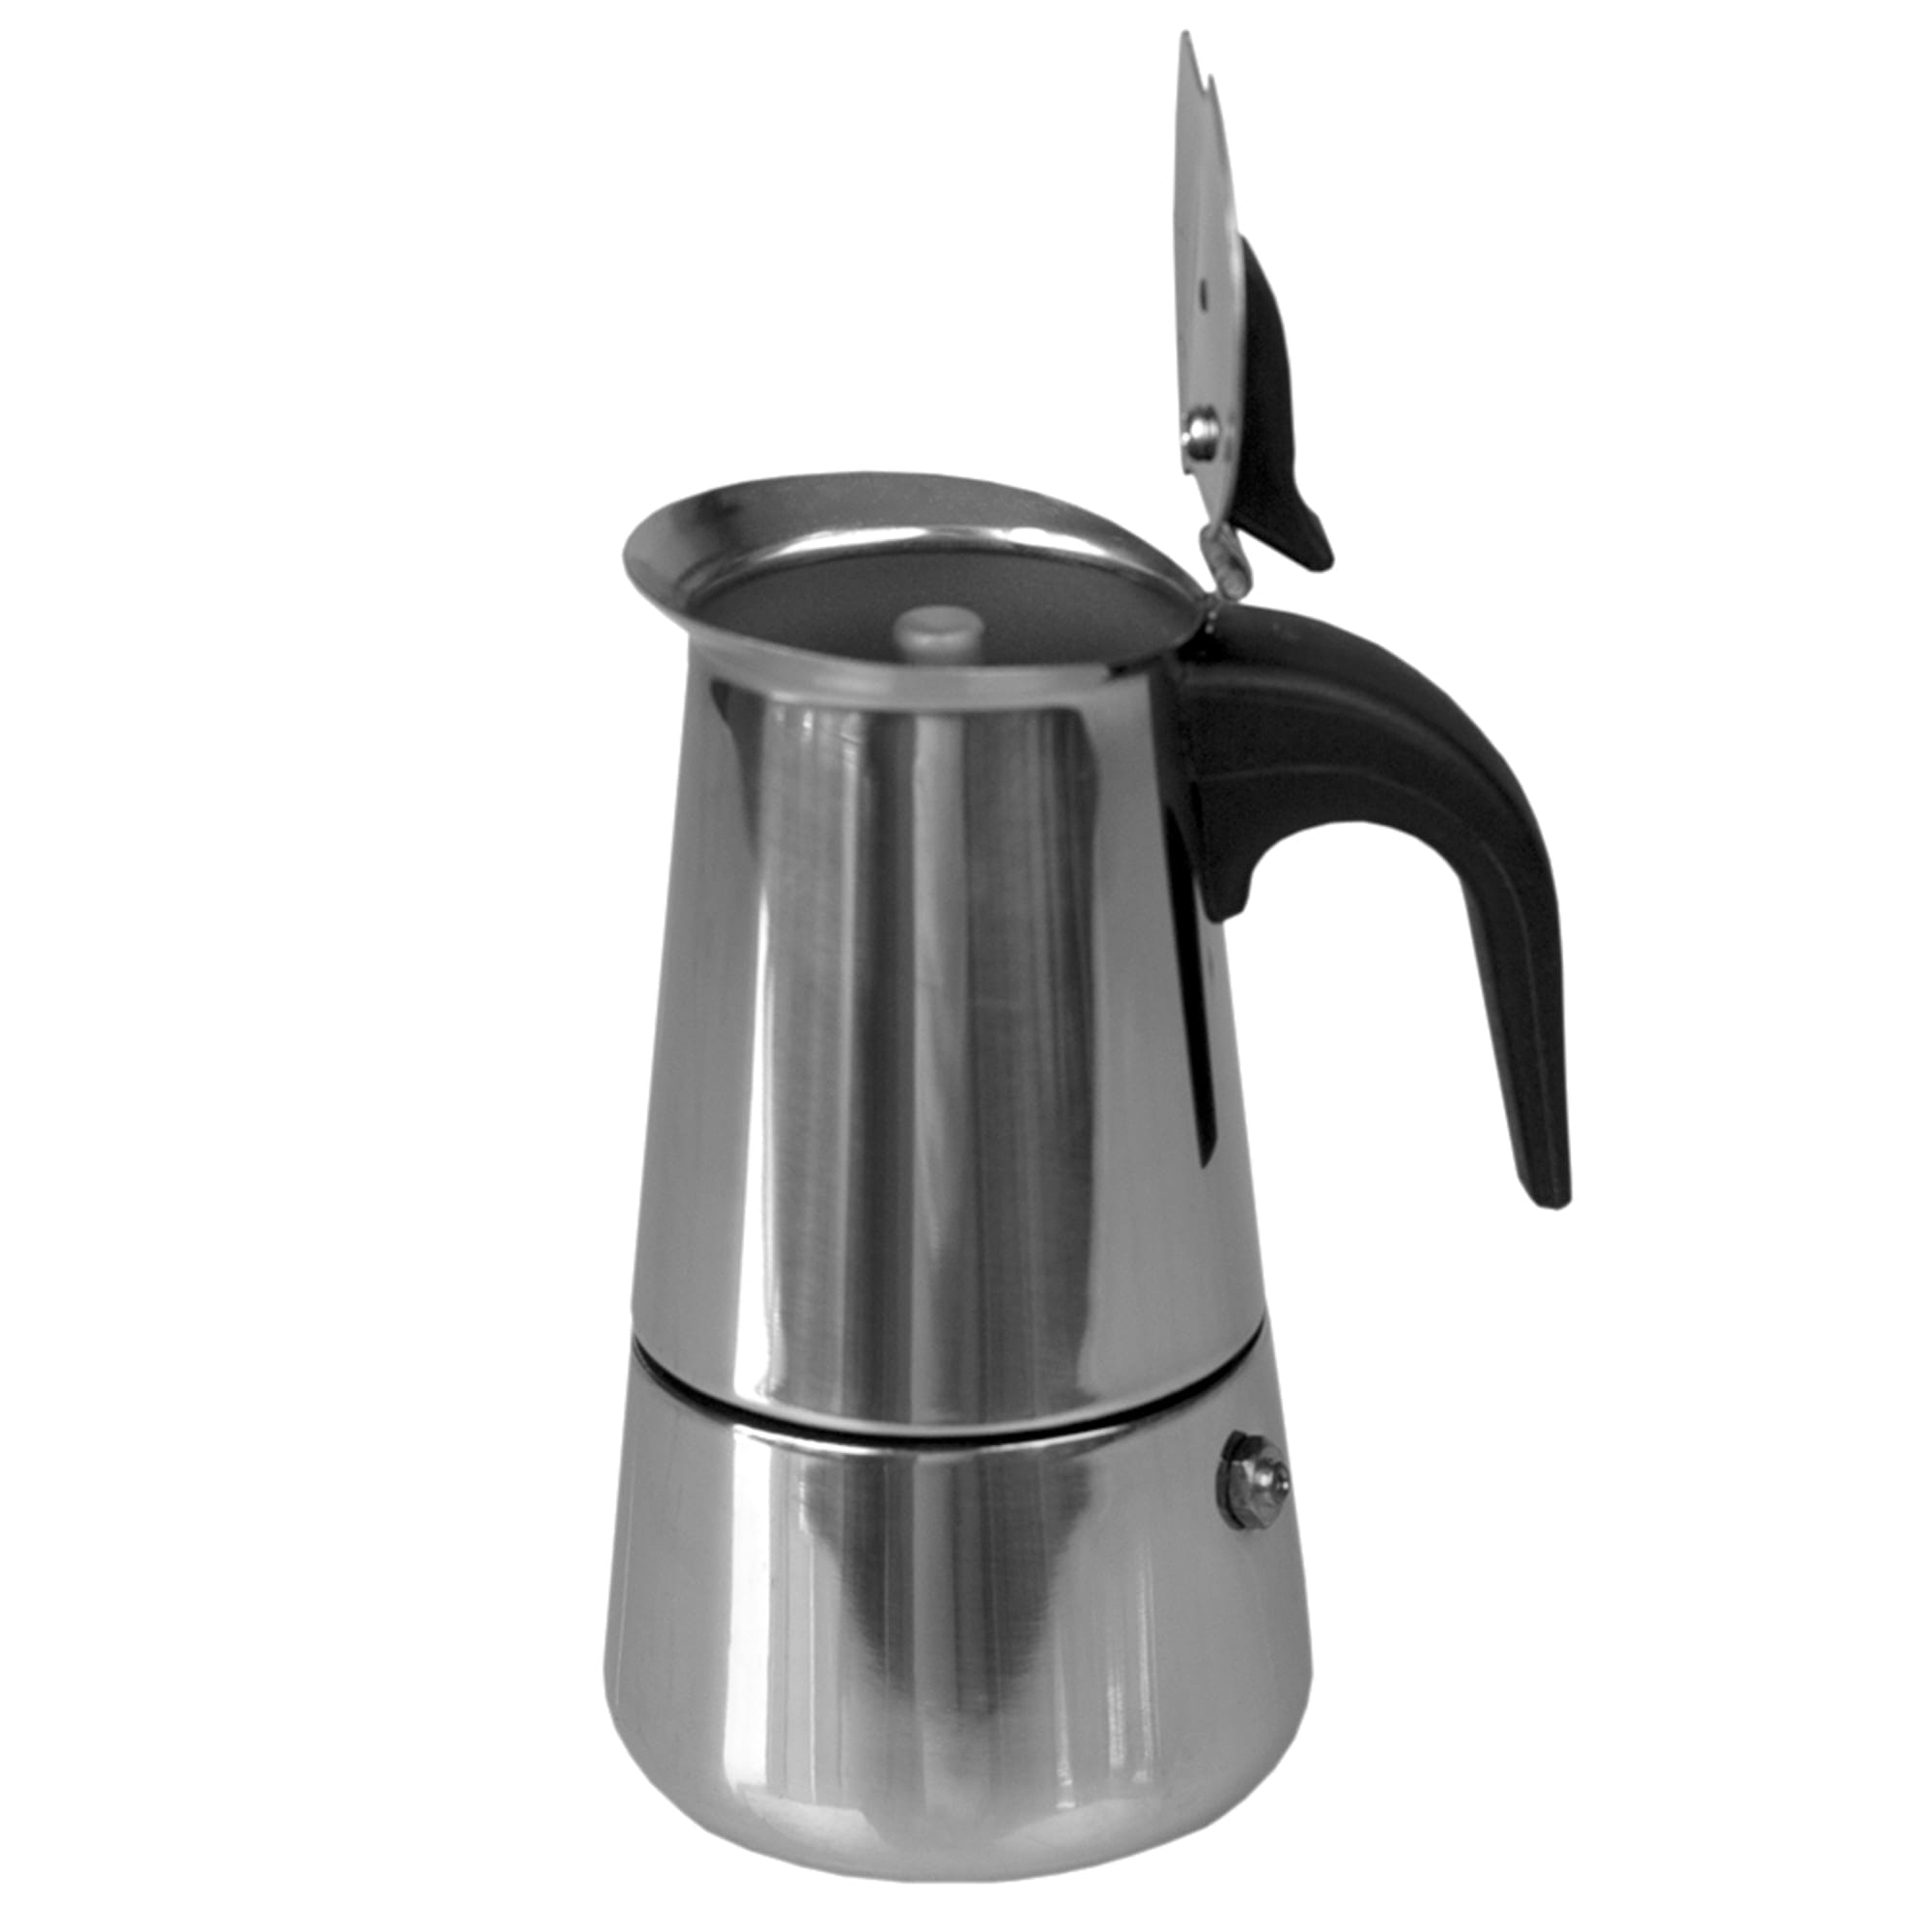 Home Basics 2 Cup Demitasse Shot Stainless Steel Stovetop Espresso Maker, Silver $7.00 EACH, CASE PACK OF 12